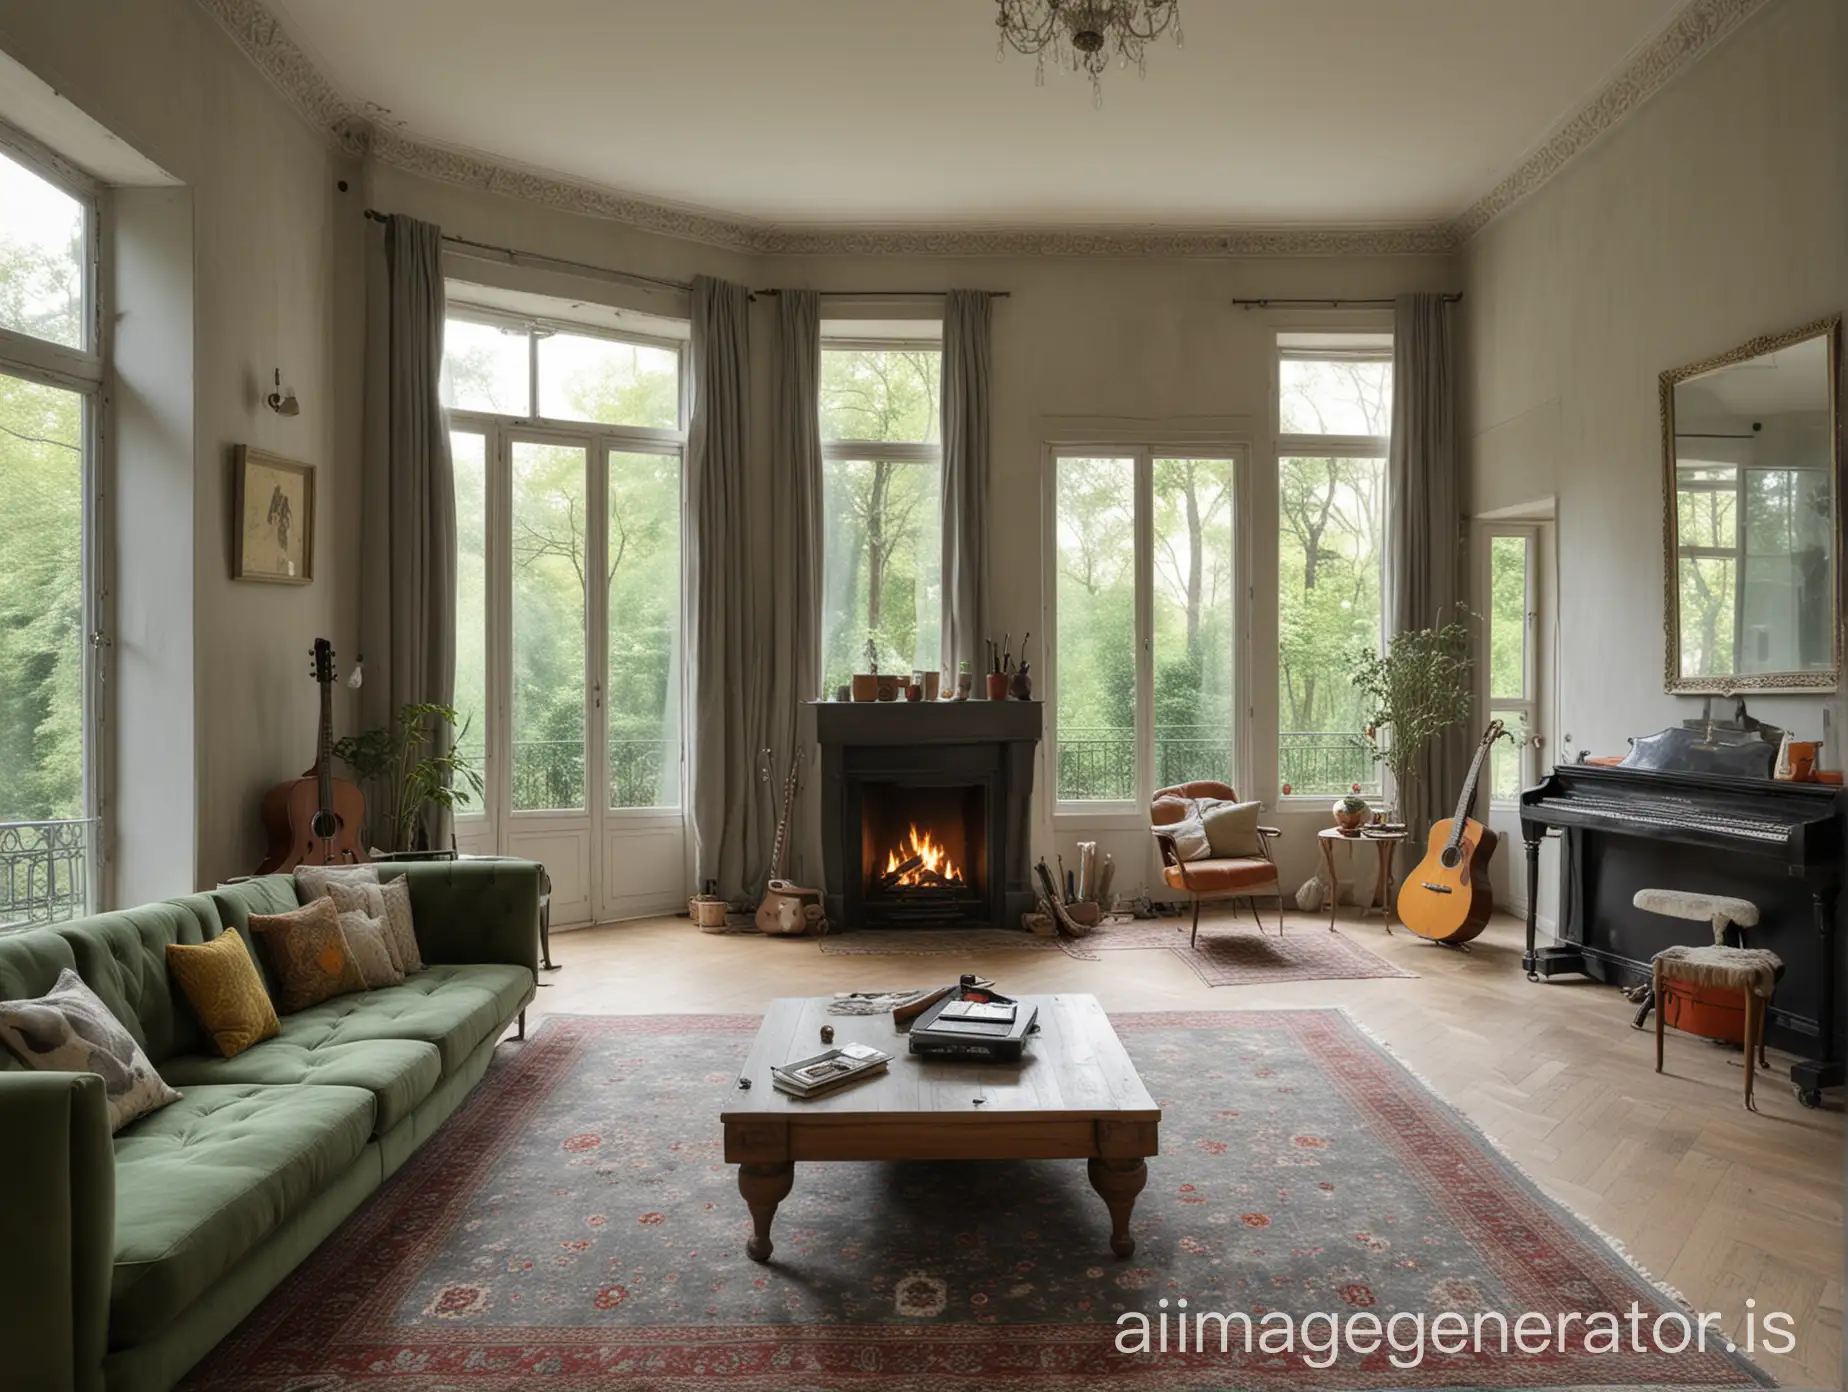 un apartmento spacious and bright, with a lit fireplace on the left, in front a very large window overlooking a grove, to the right farther back you can see a space where there is a piano, a guitar and musical instruments. In front of the fireplace there is a sofa in the shape of L, gray color and a Persian carpet. The fireplace is modern prismatic green petroleum color. The atmosphere is warm and modern.